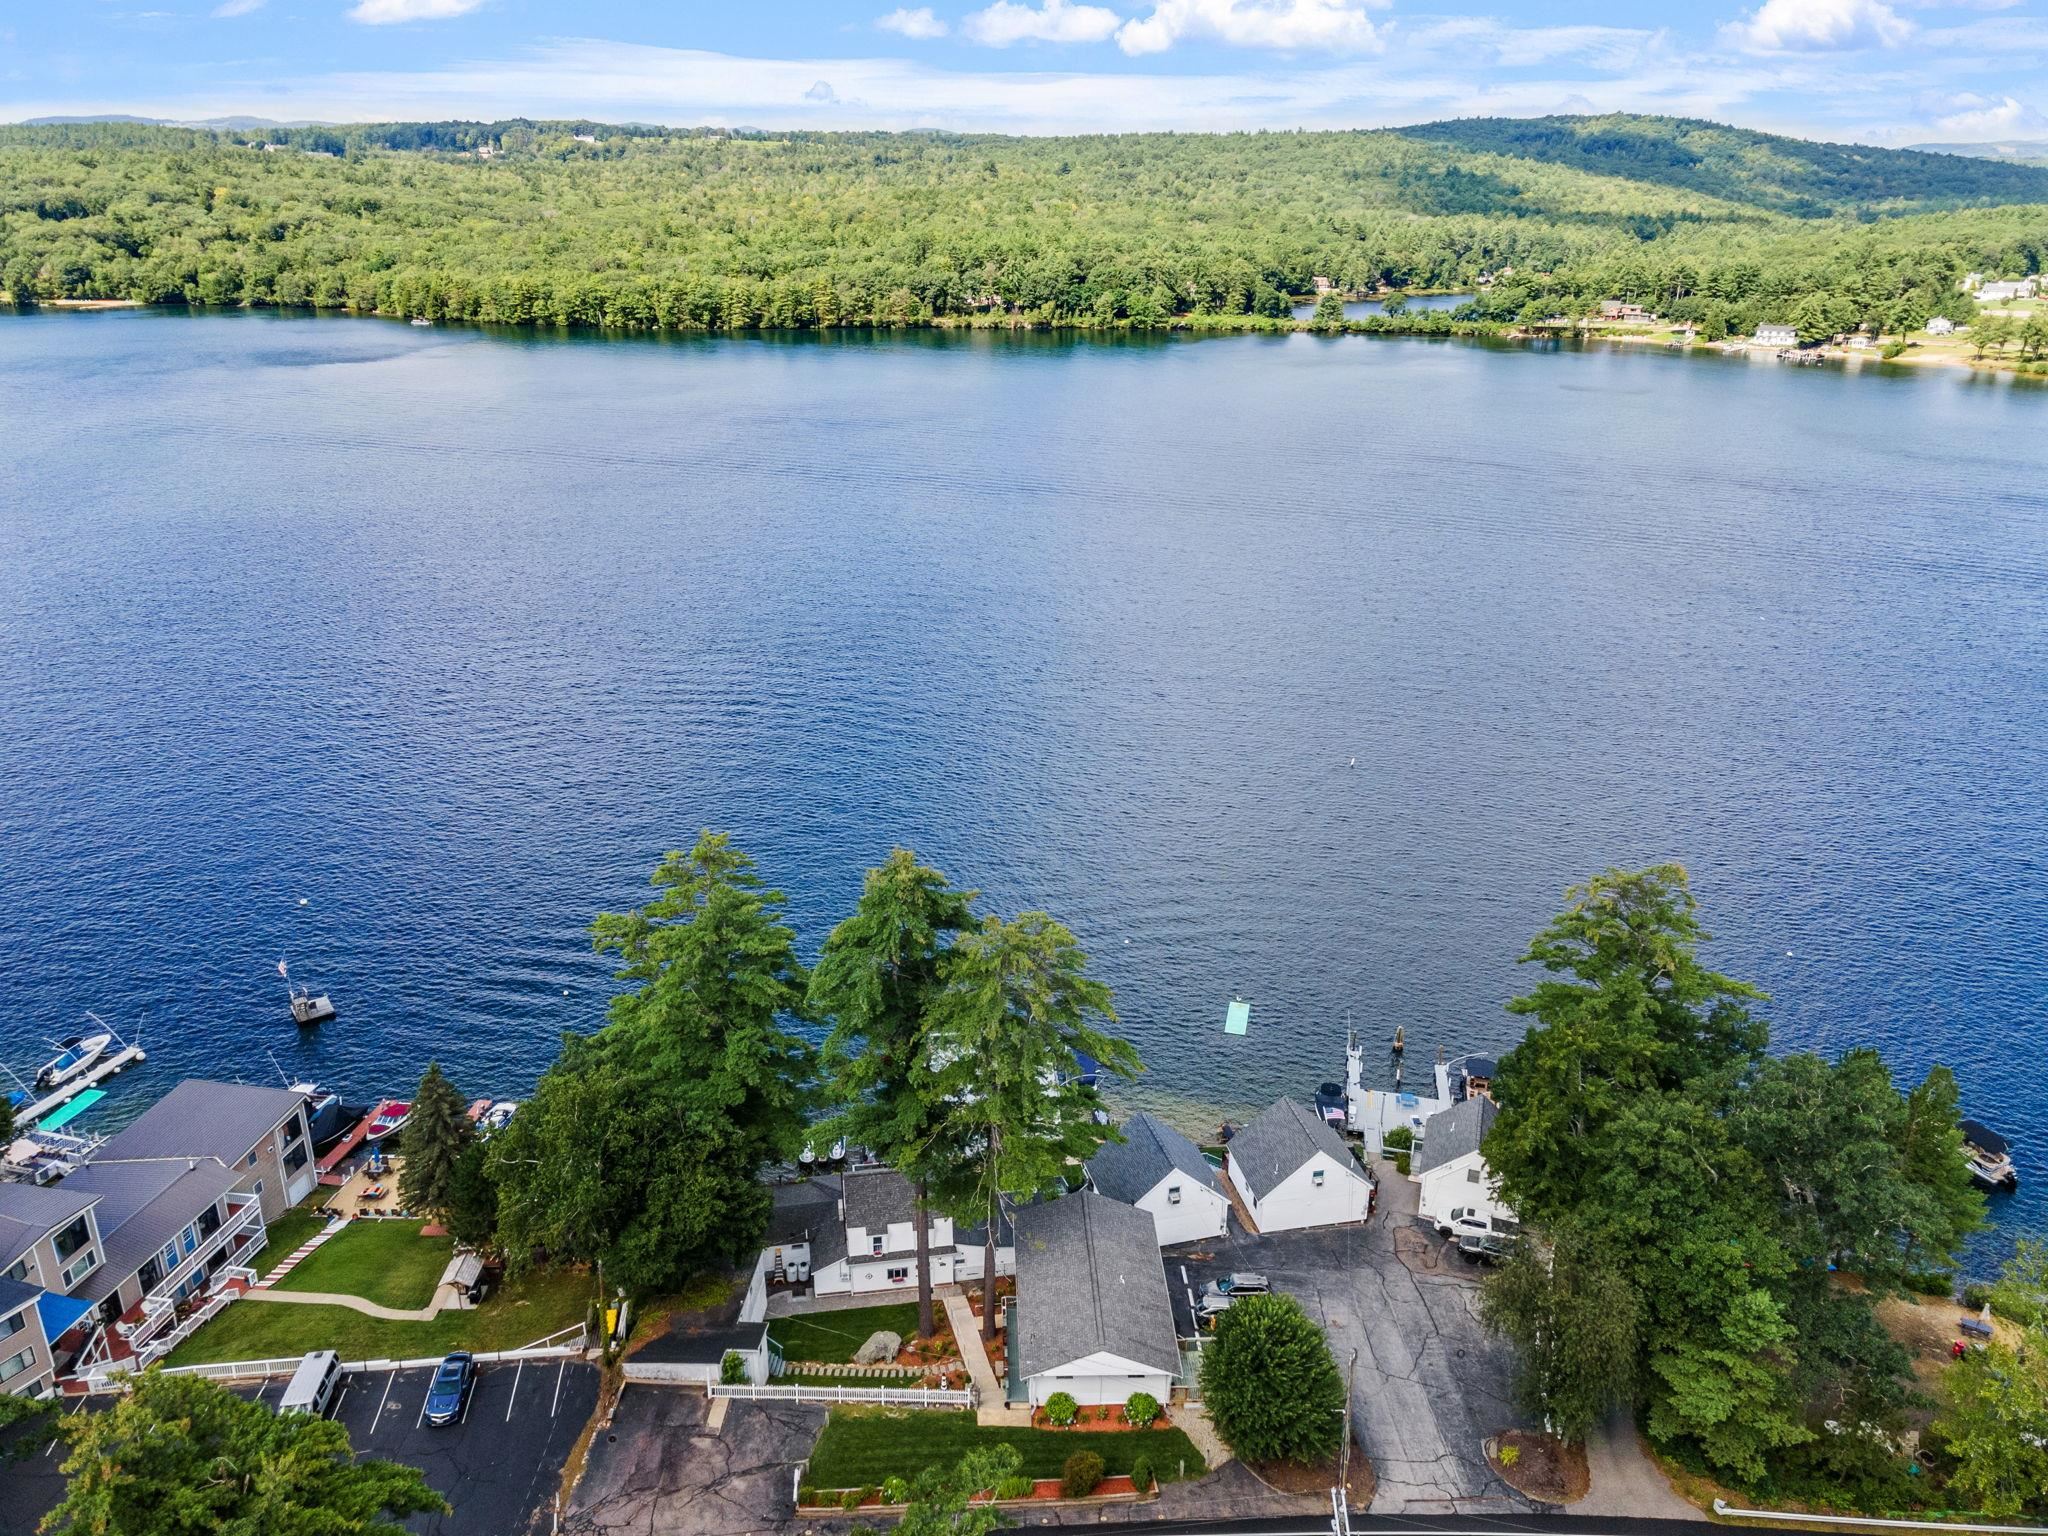 New Hampshire res Real Estate